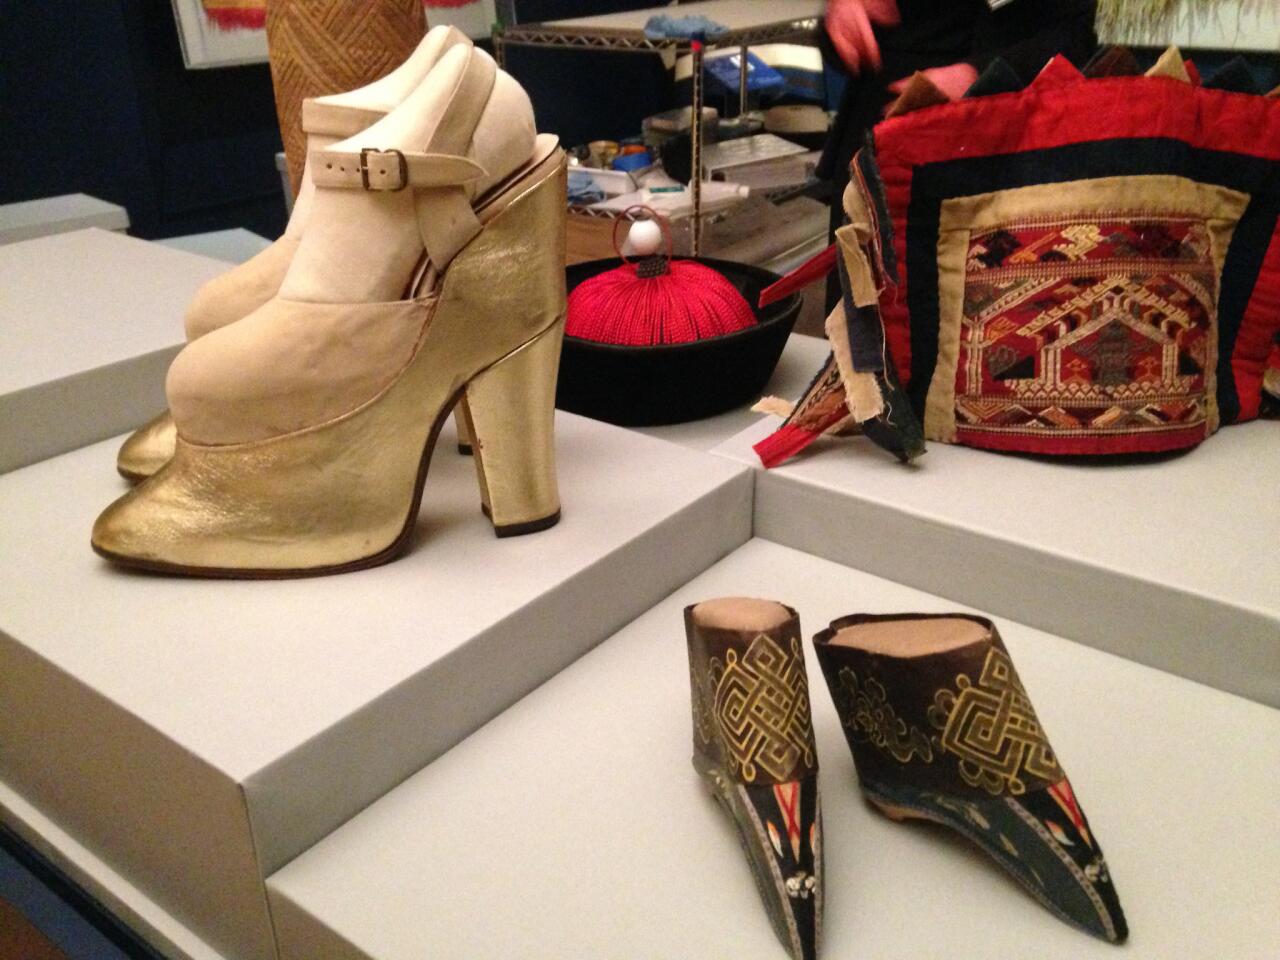 Platform shoes worn by actress Mae West in the 1950s were used to increase her height by more than 8 inches. In the foreground,shoes for a Manchu noblewoman from China that date to the late 19th century. Both are on display at the Foggy Bottom museum that opened Monday.